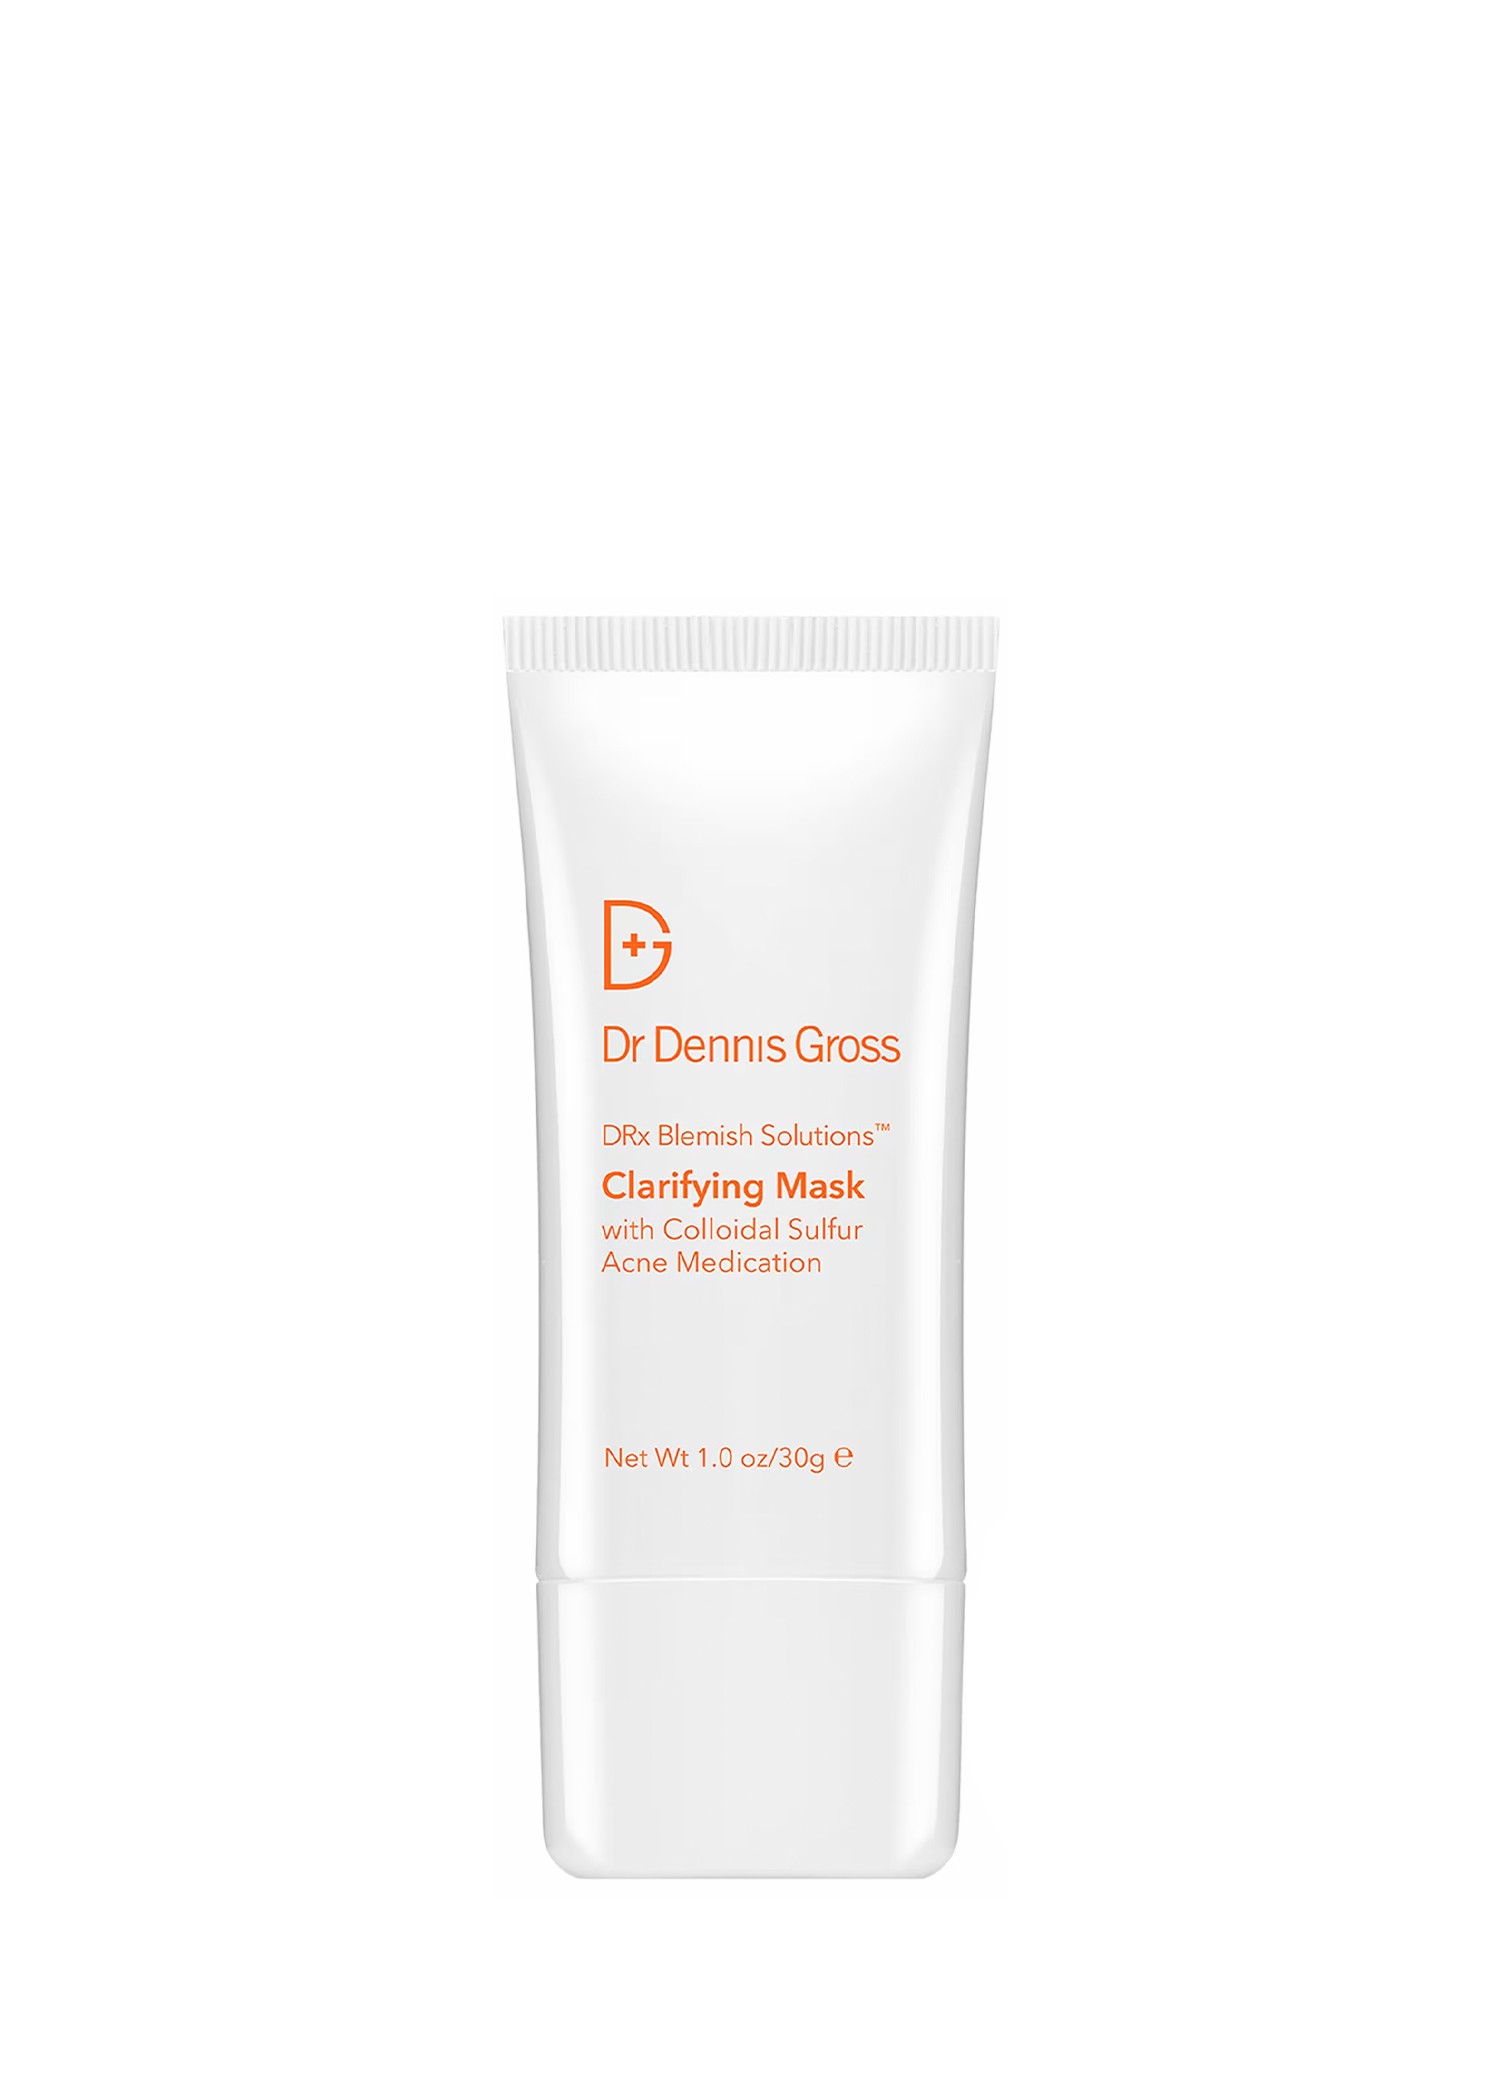 DRx Blemish Solutions Clarifying Mask 30 g